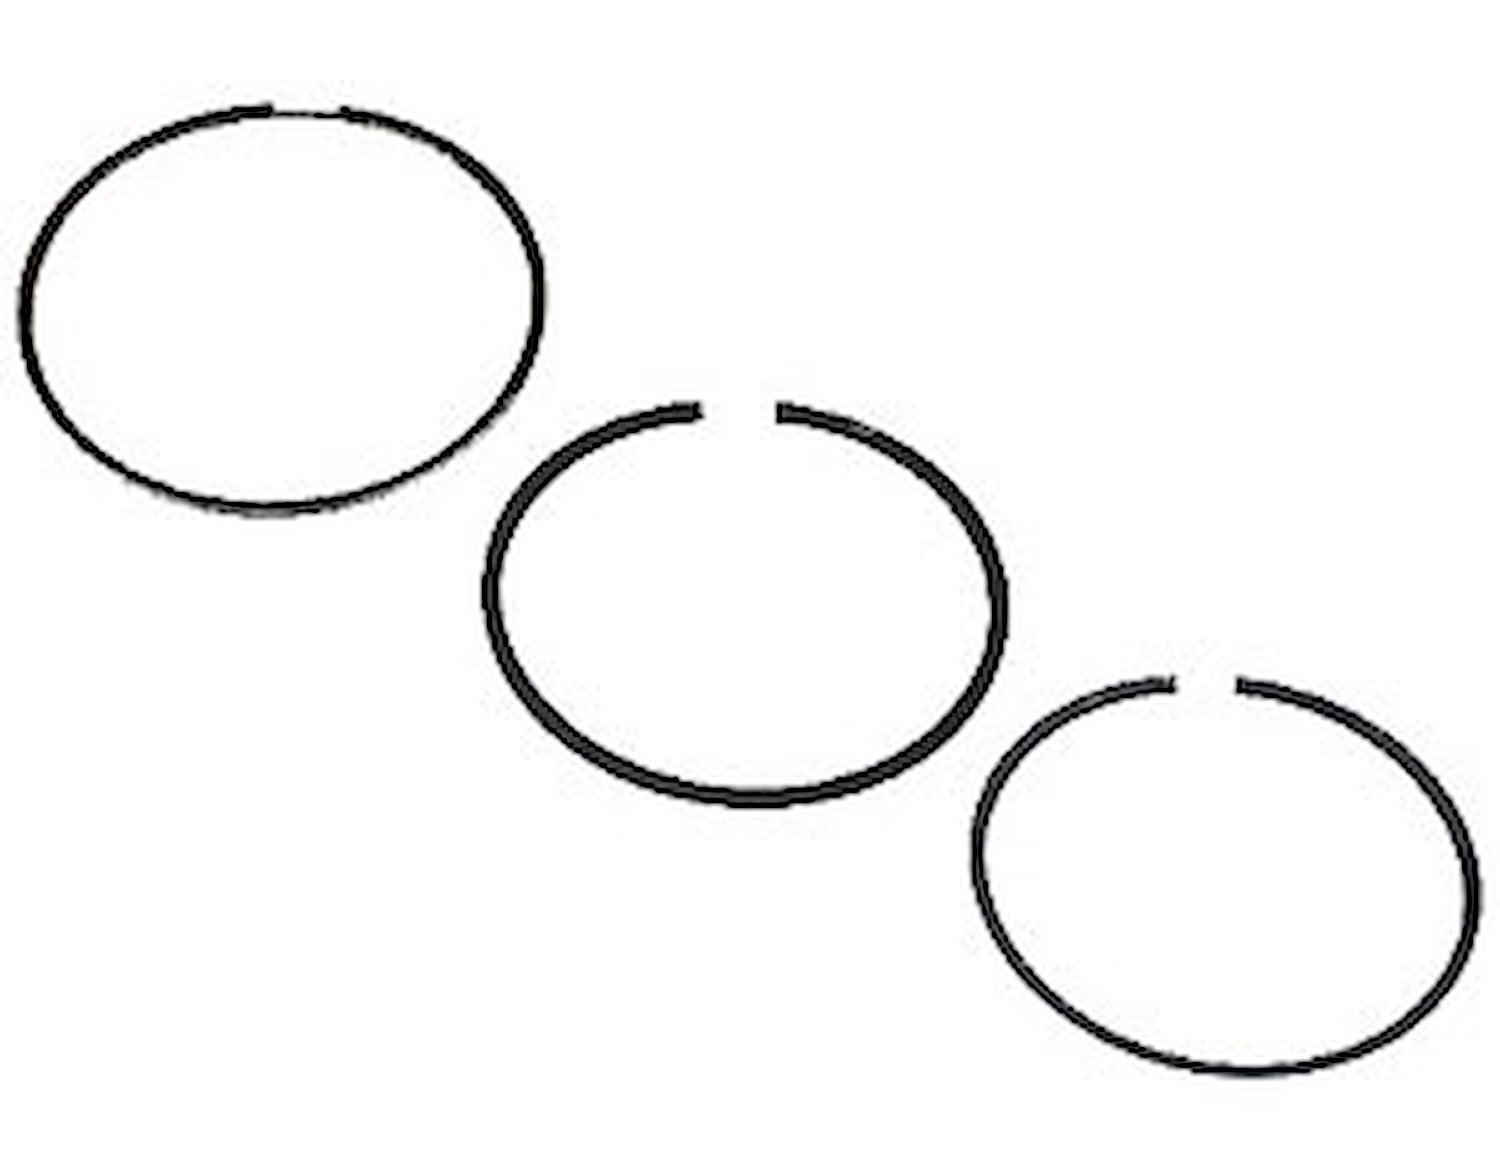 Standard Tension Single Cylinder Piston Ring Set Bore: 4.030"/File Fit: 4.035"